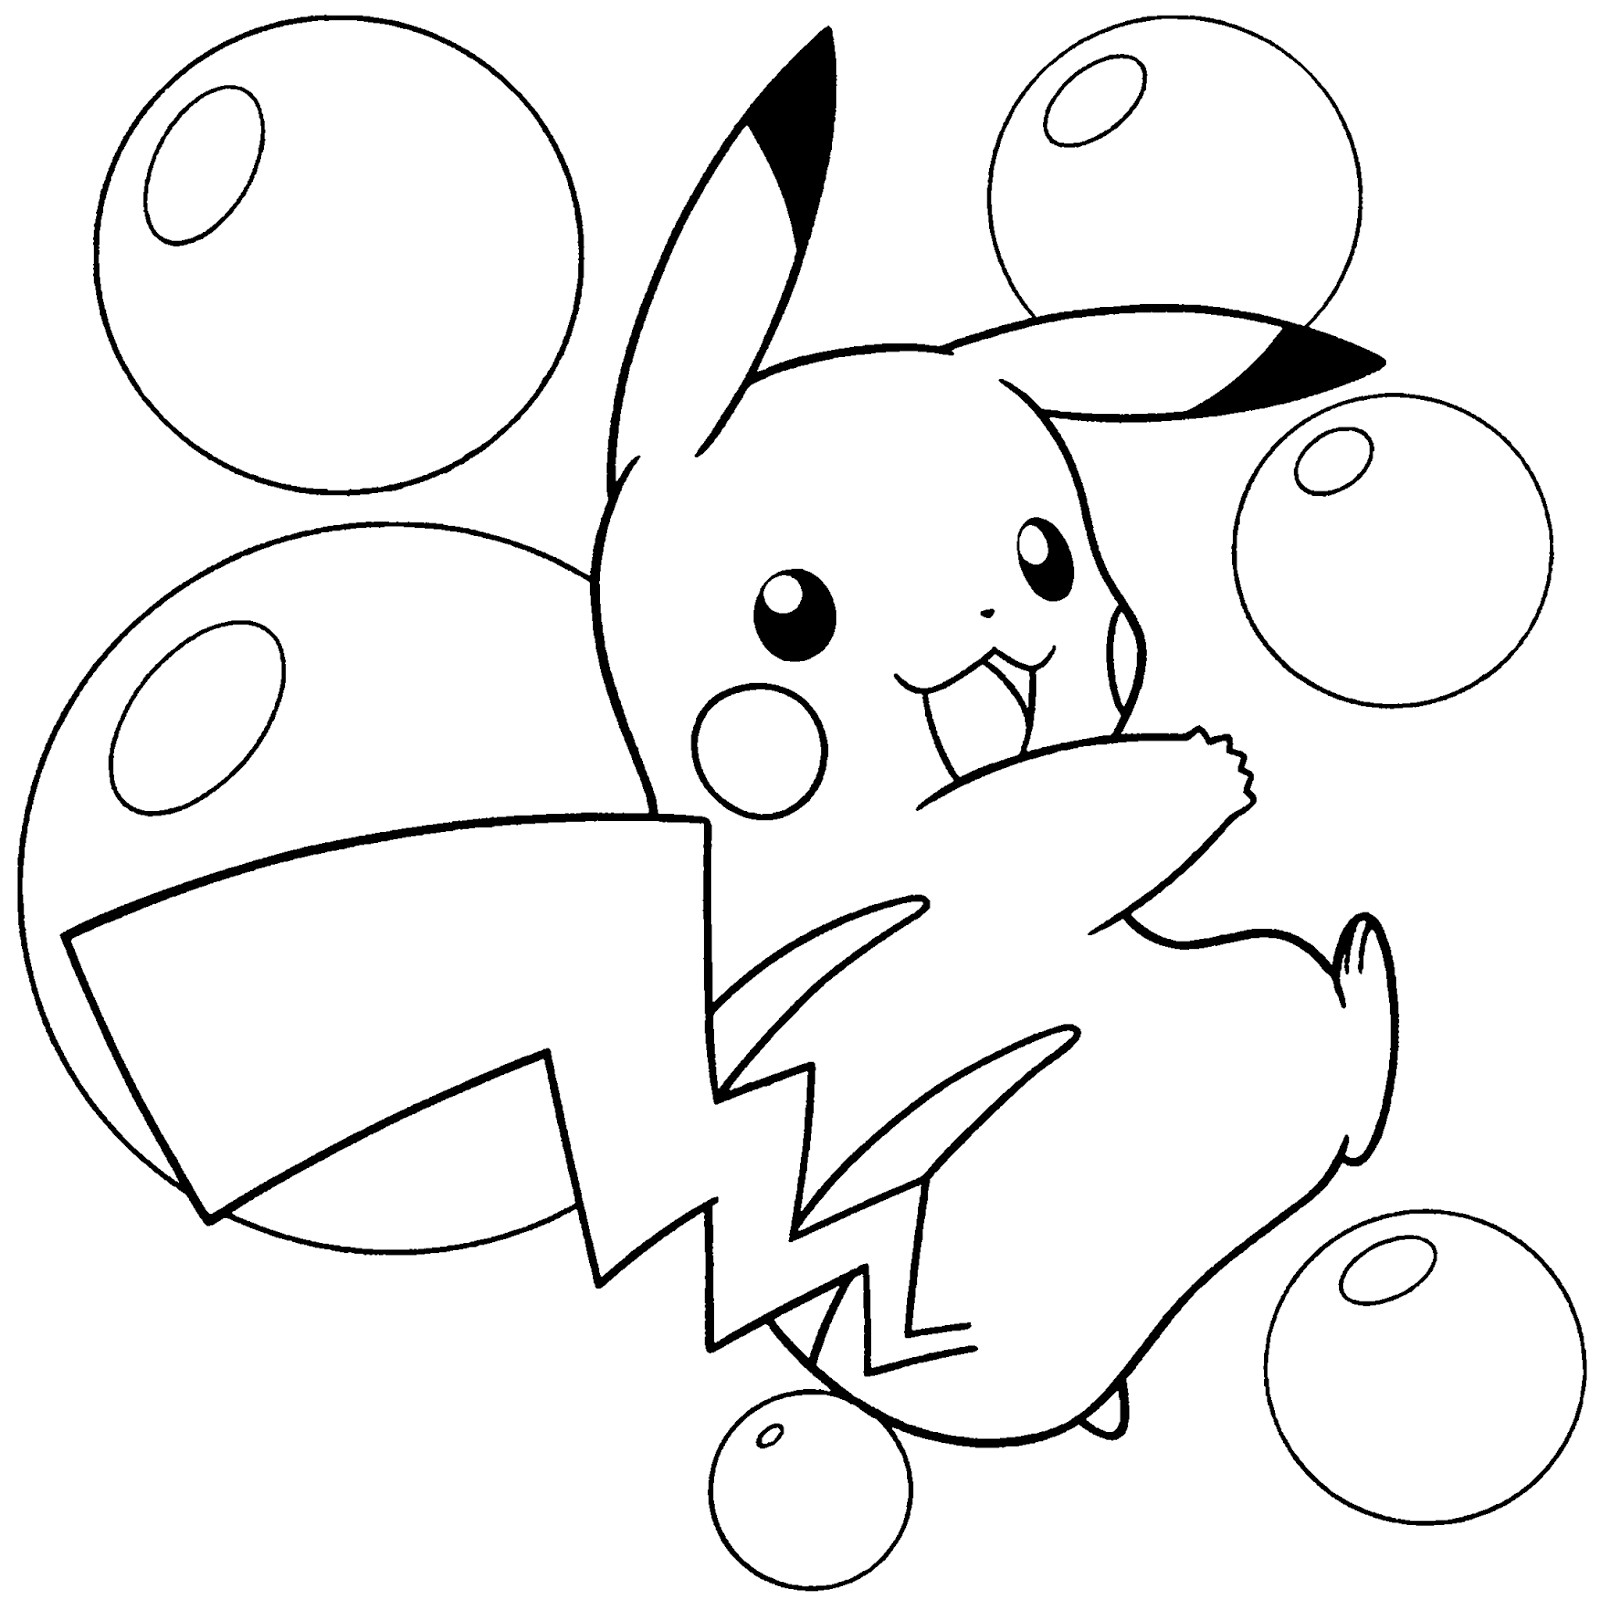 Pokemon Printable Coloring Pages
 Pokemon Coloring Pages for Kids